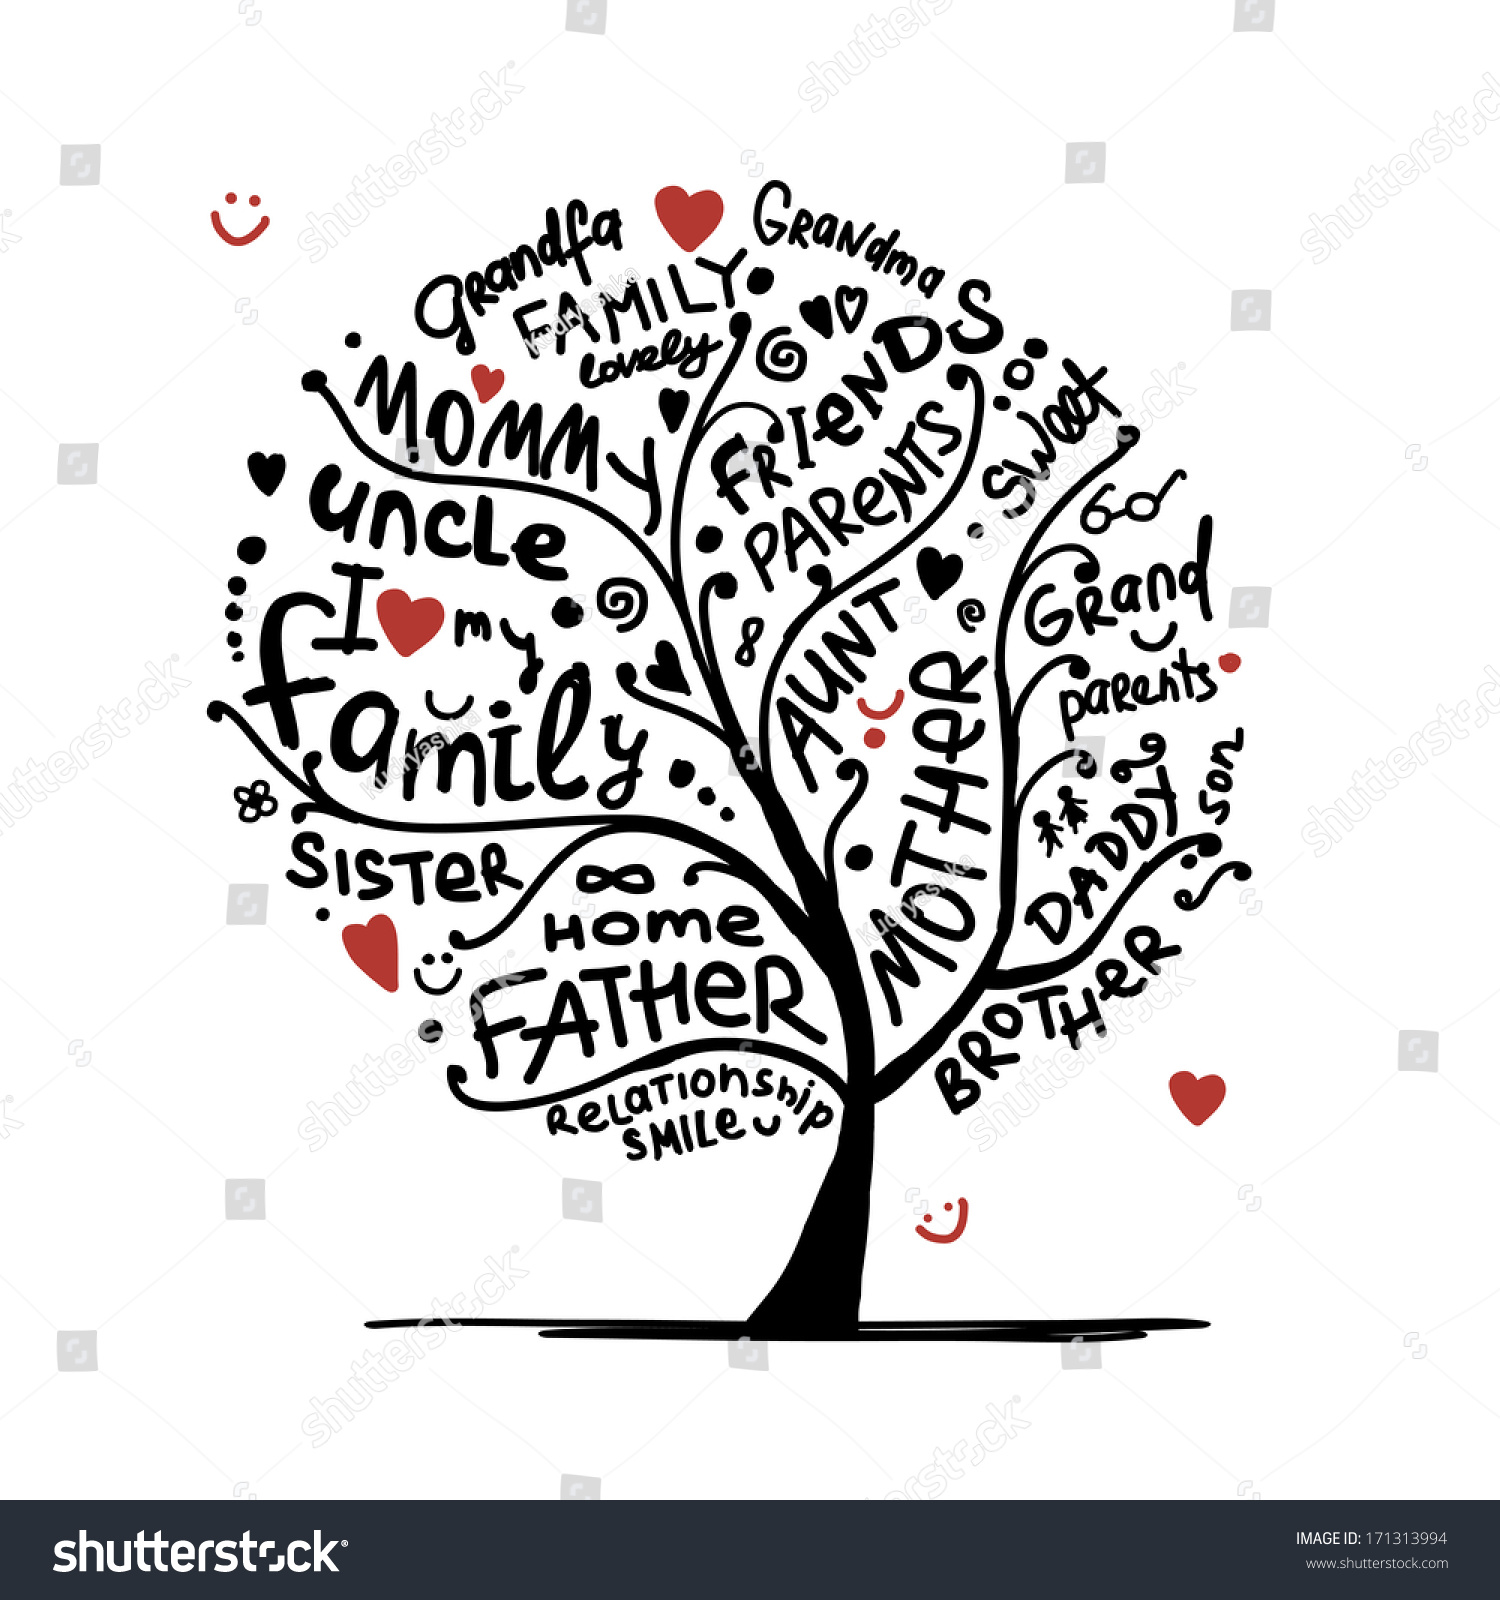 26,971 Family tree drawing Images, Stock Photos & Vectors | Shutterstock